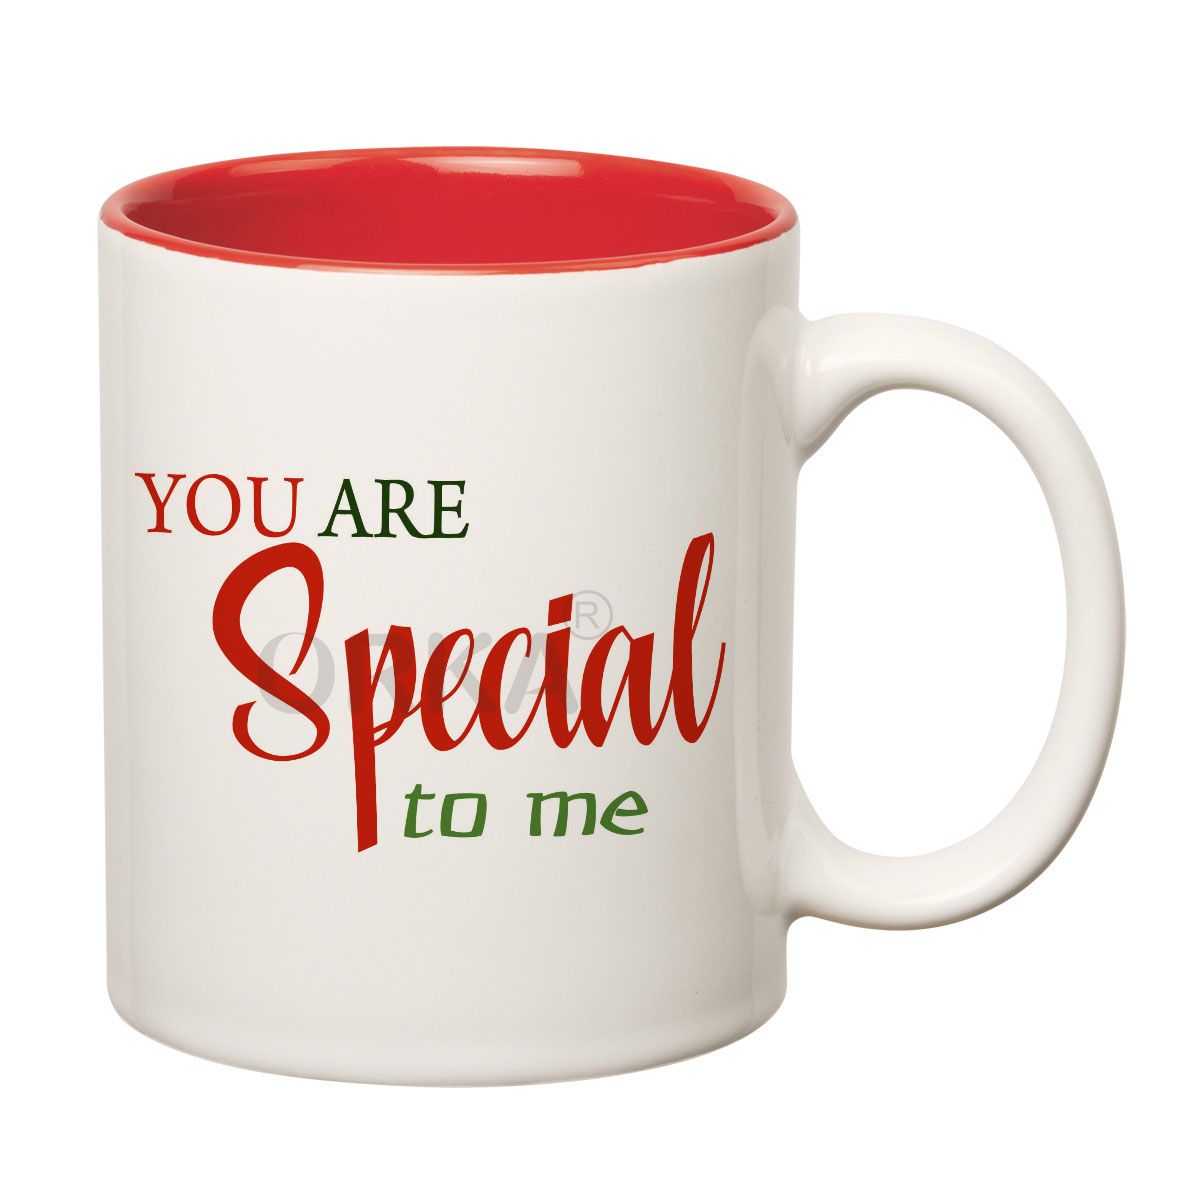 ORKA Coffee Mug Quotes Printed( You Are Special ) Theme 11 Oz   